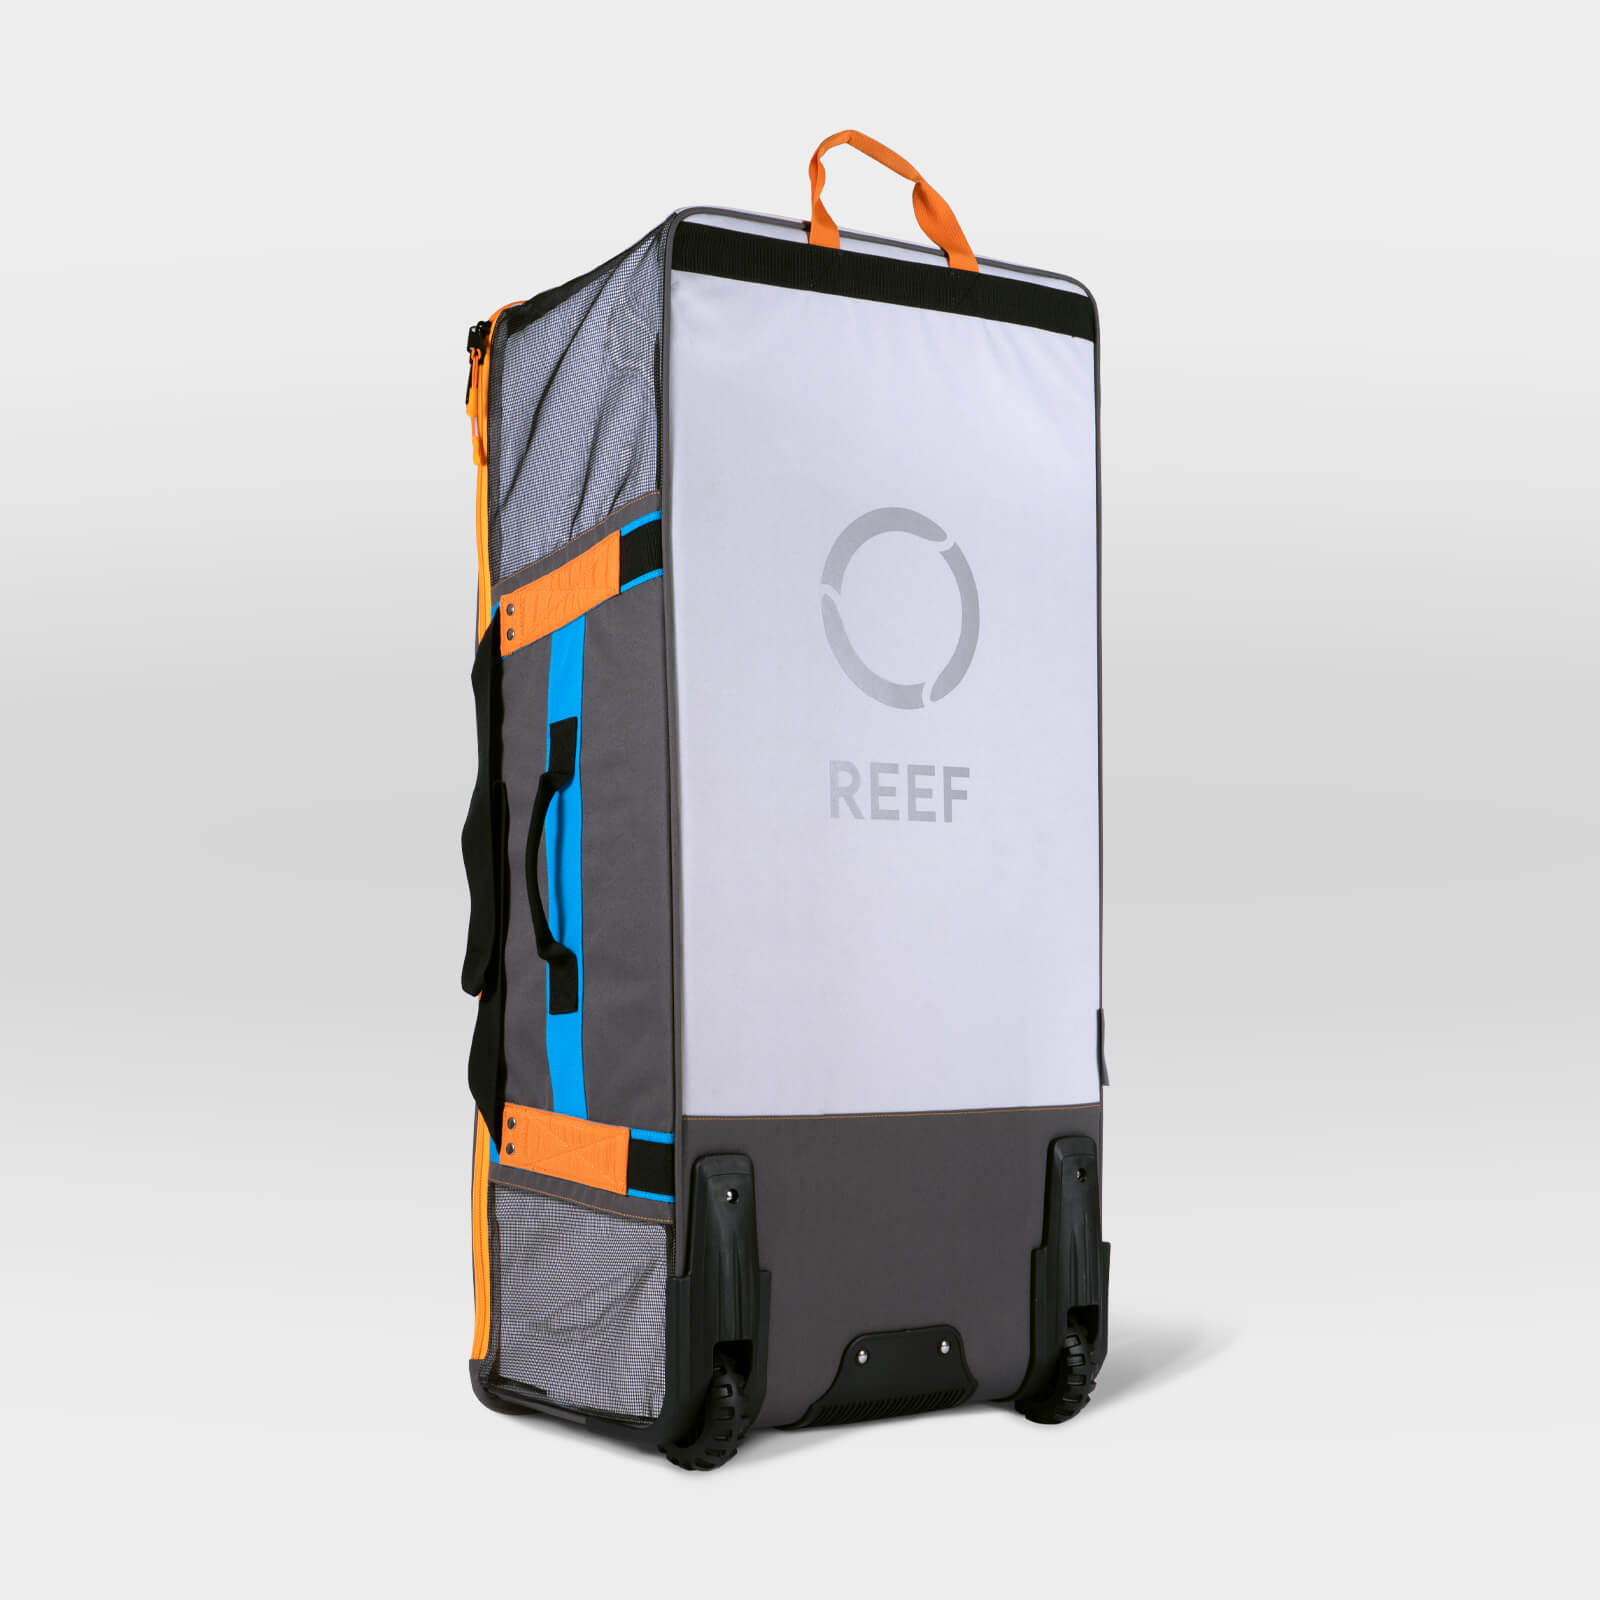 Reef mat in carrying case